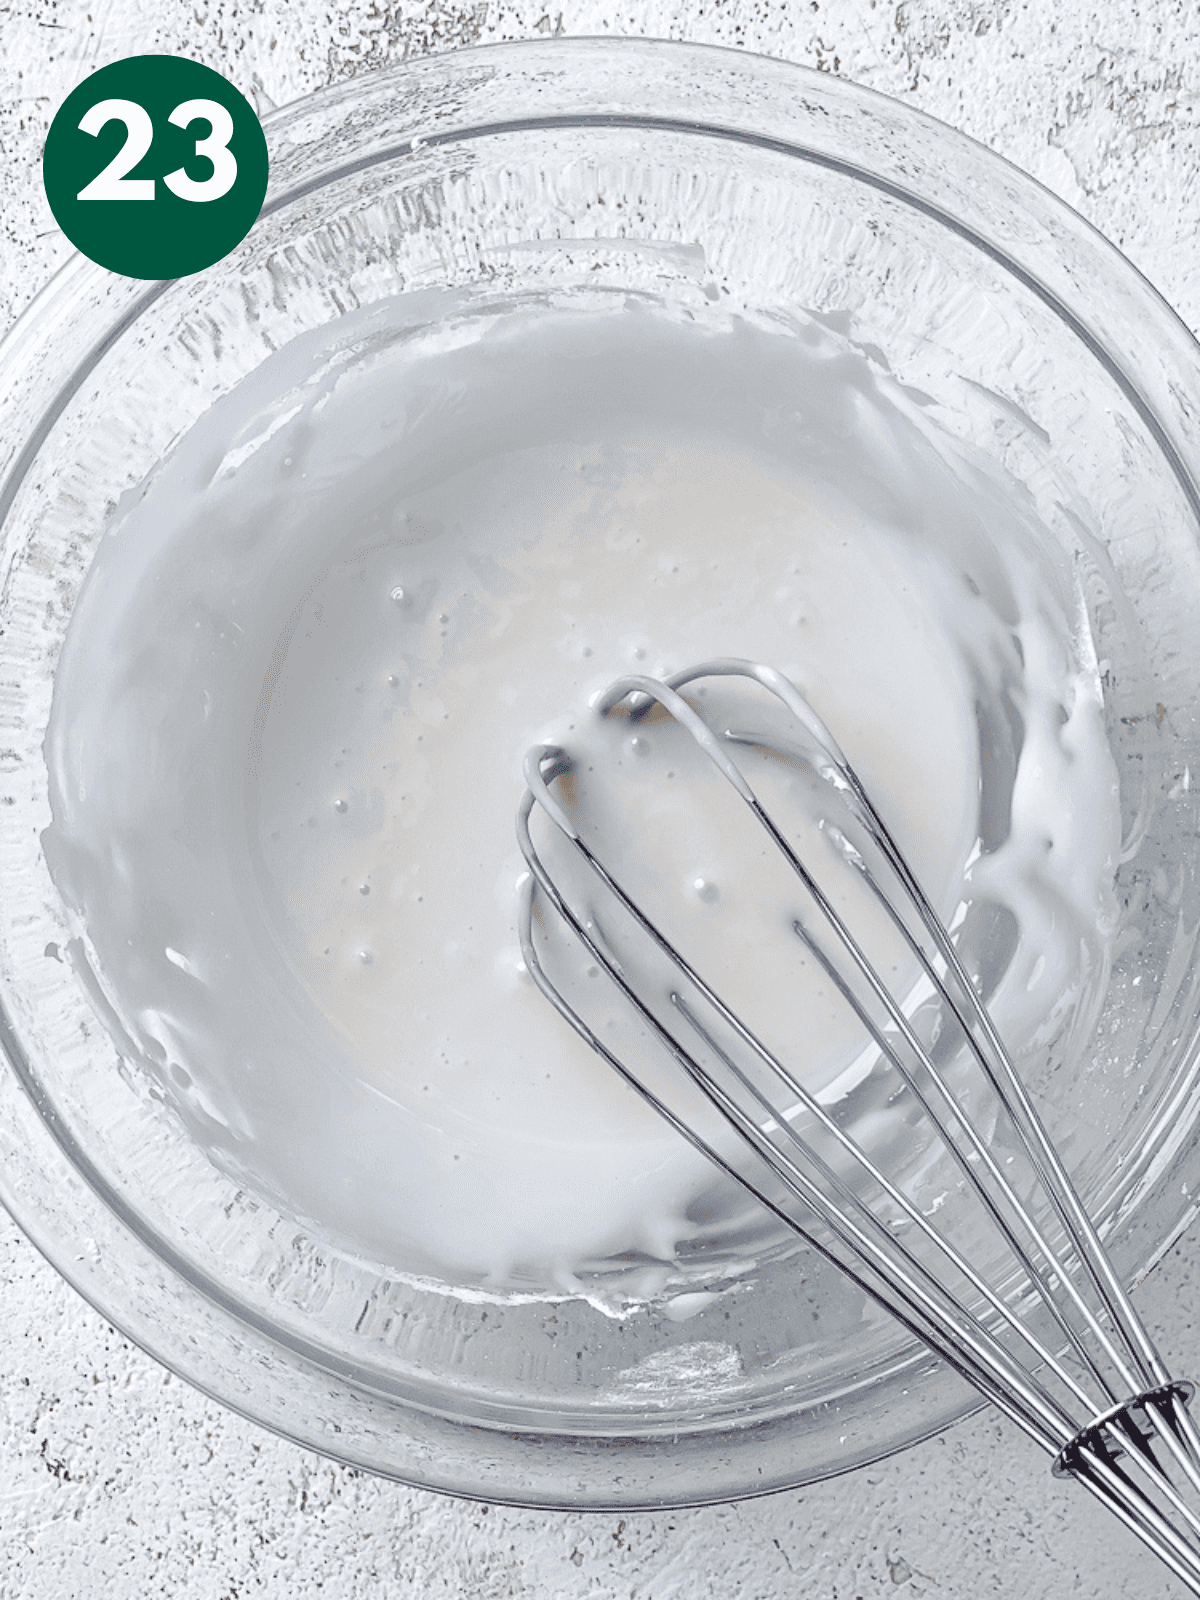 whisking vanilla icing in a large glass bowl.